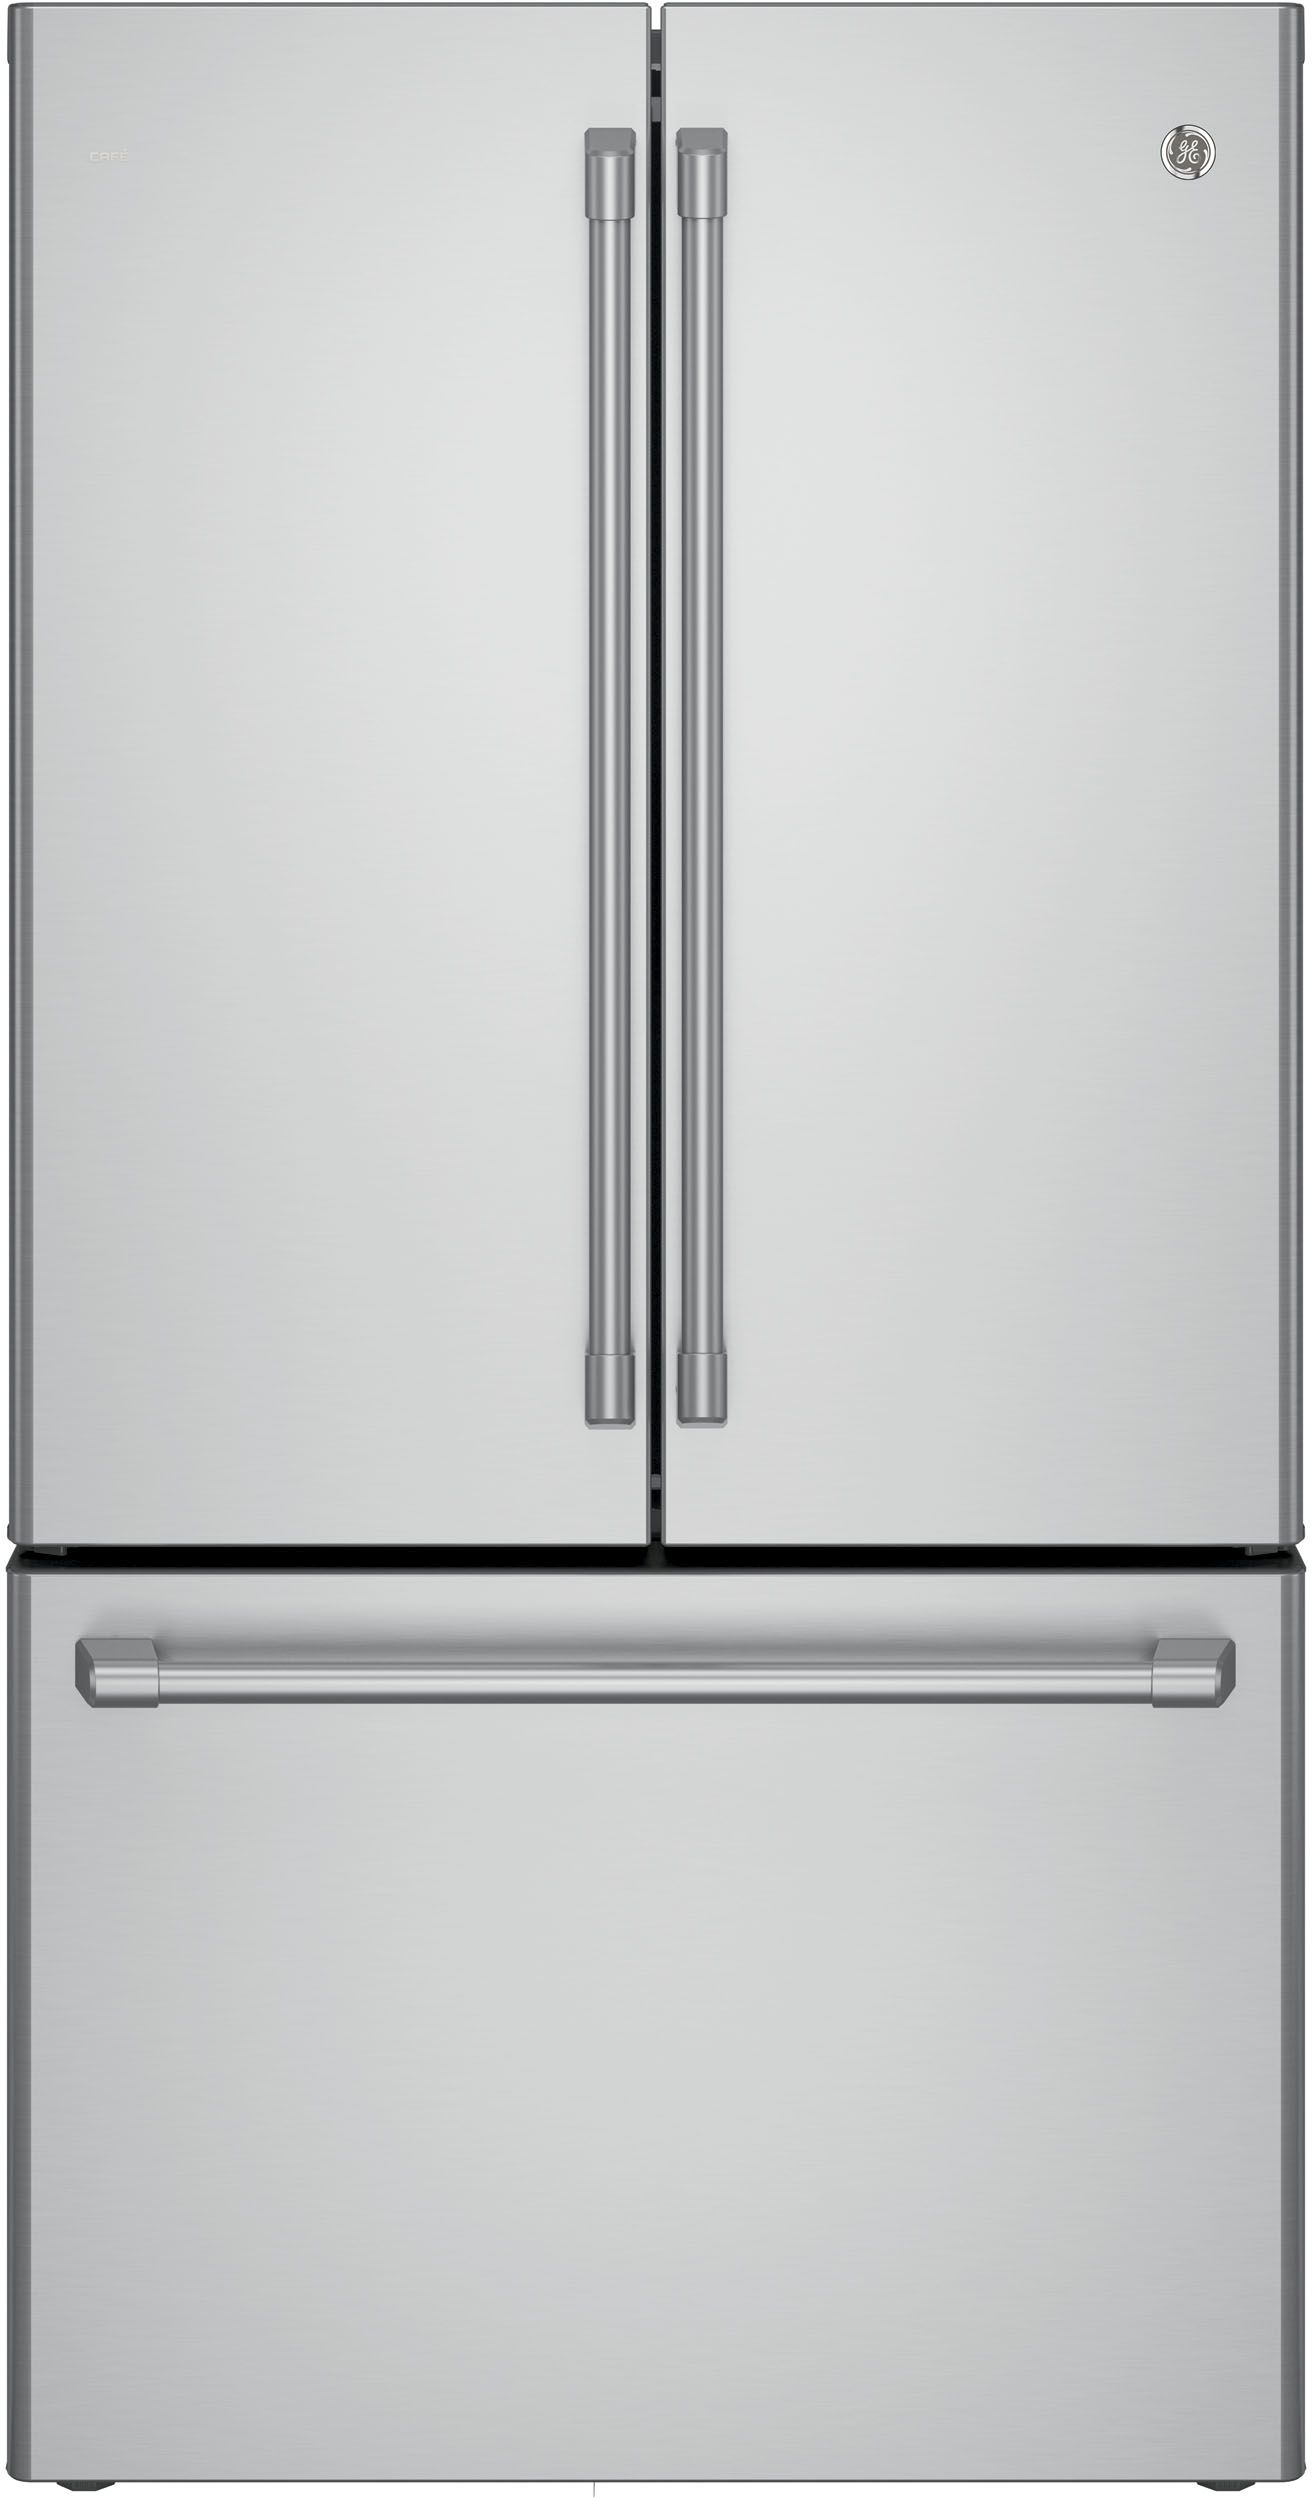 Café™ 23.1 Cu. Ft. Stainless Steel Counter Depth French Door Refrigerator